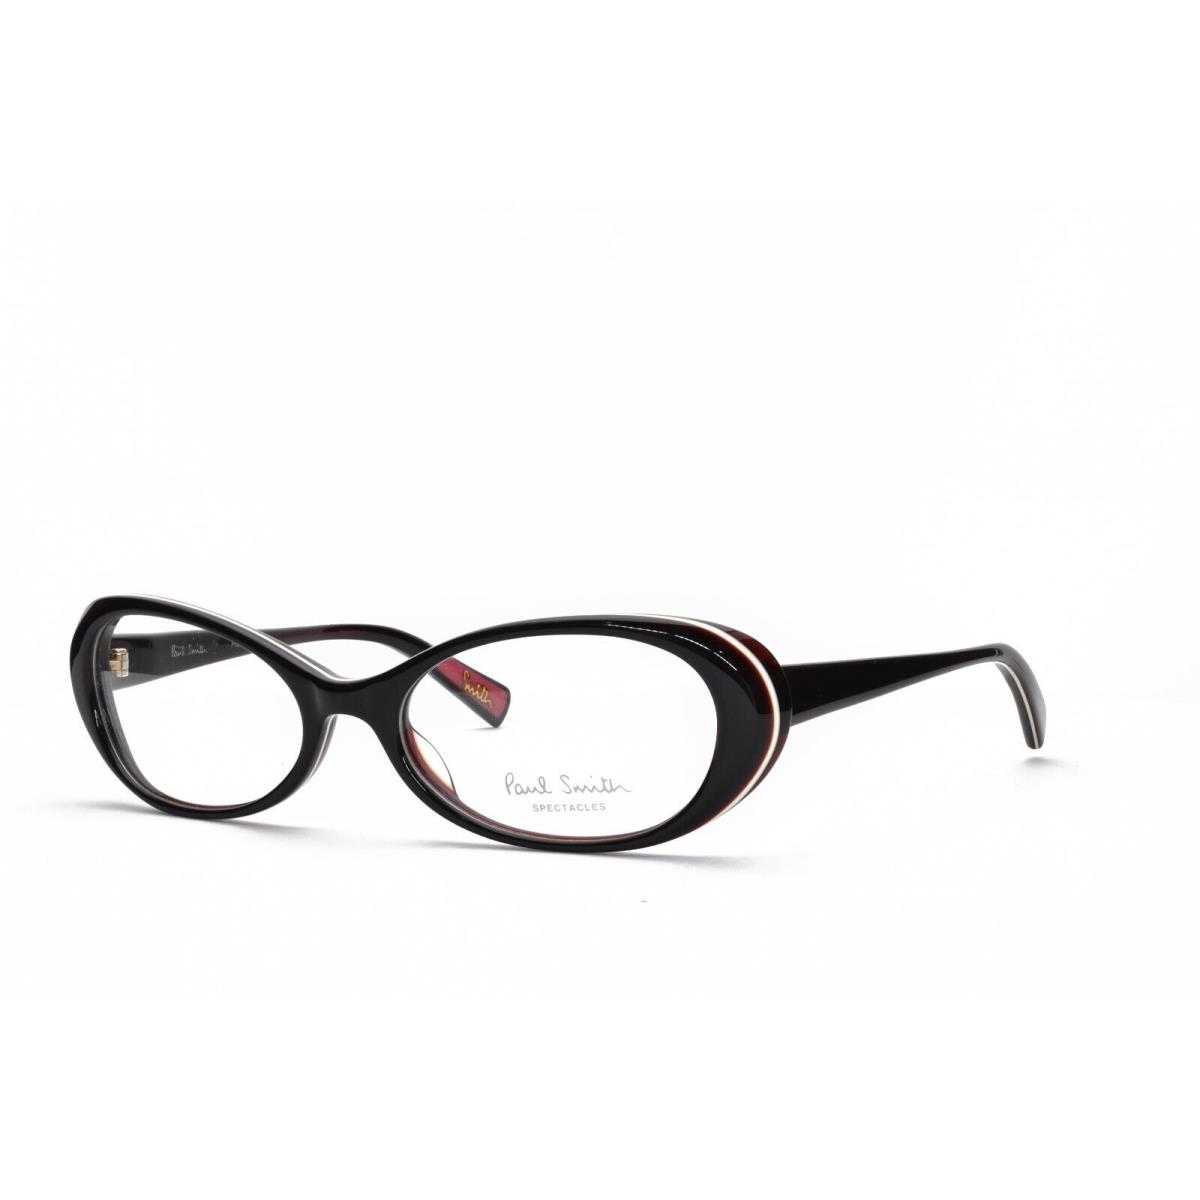 Paul Smith PS 415 Oxf Eyeglasses Frames Only 51-17-136